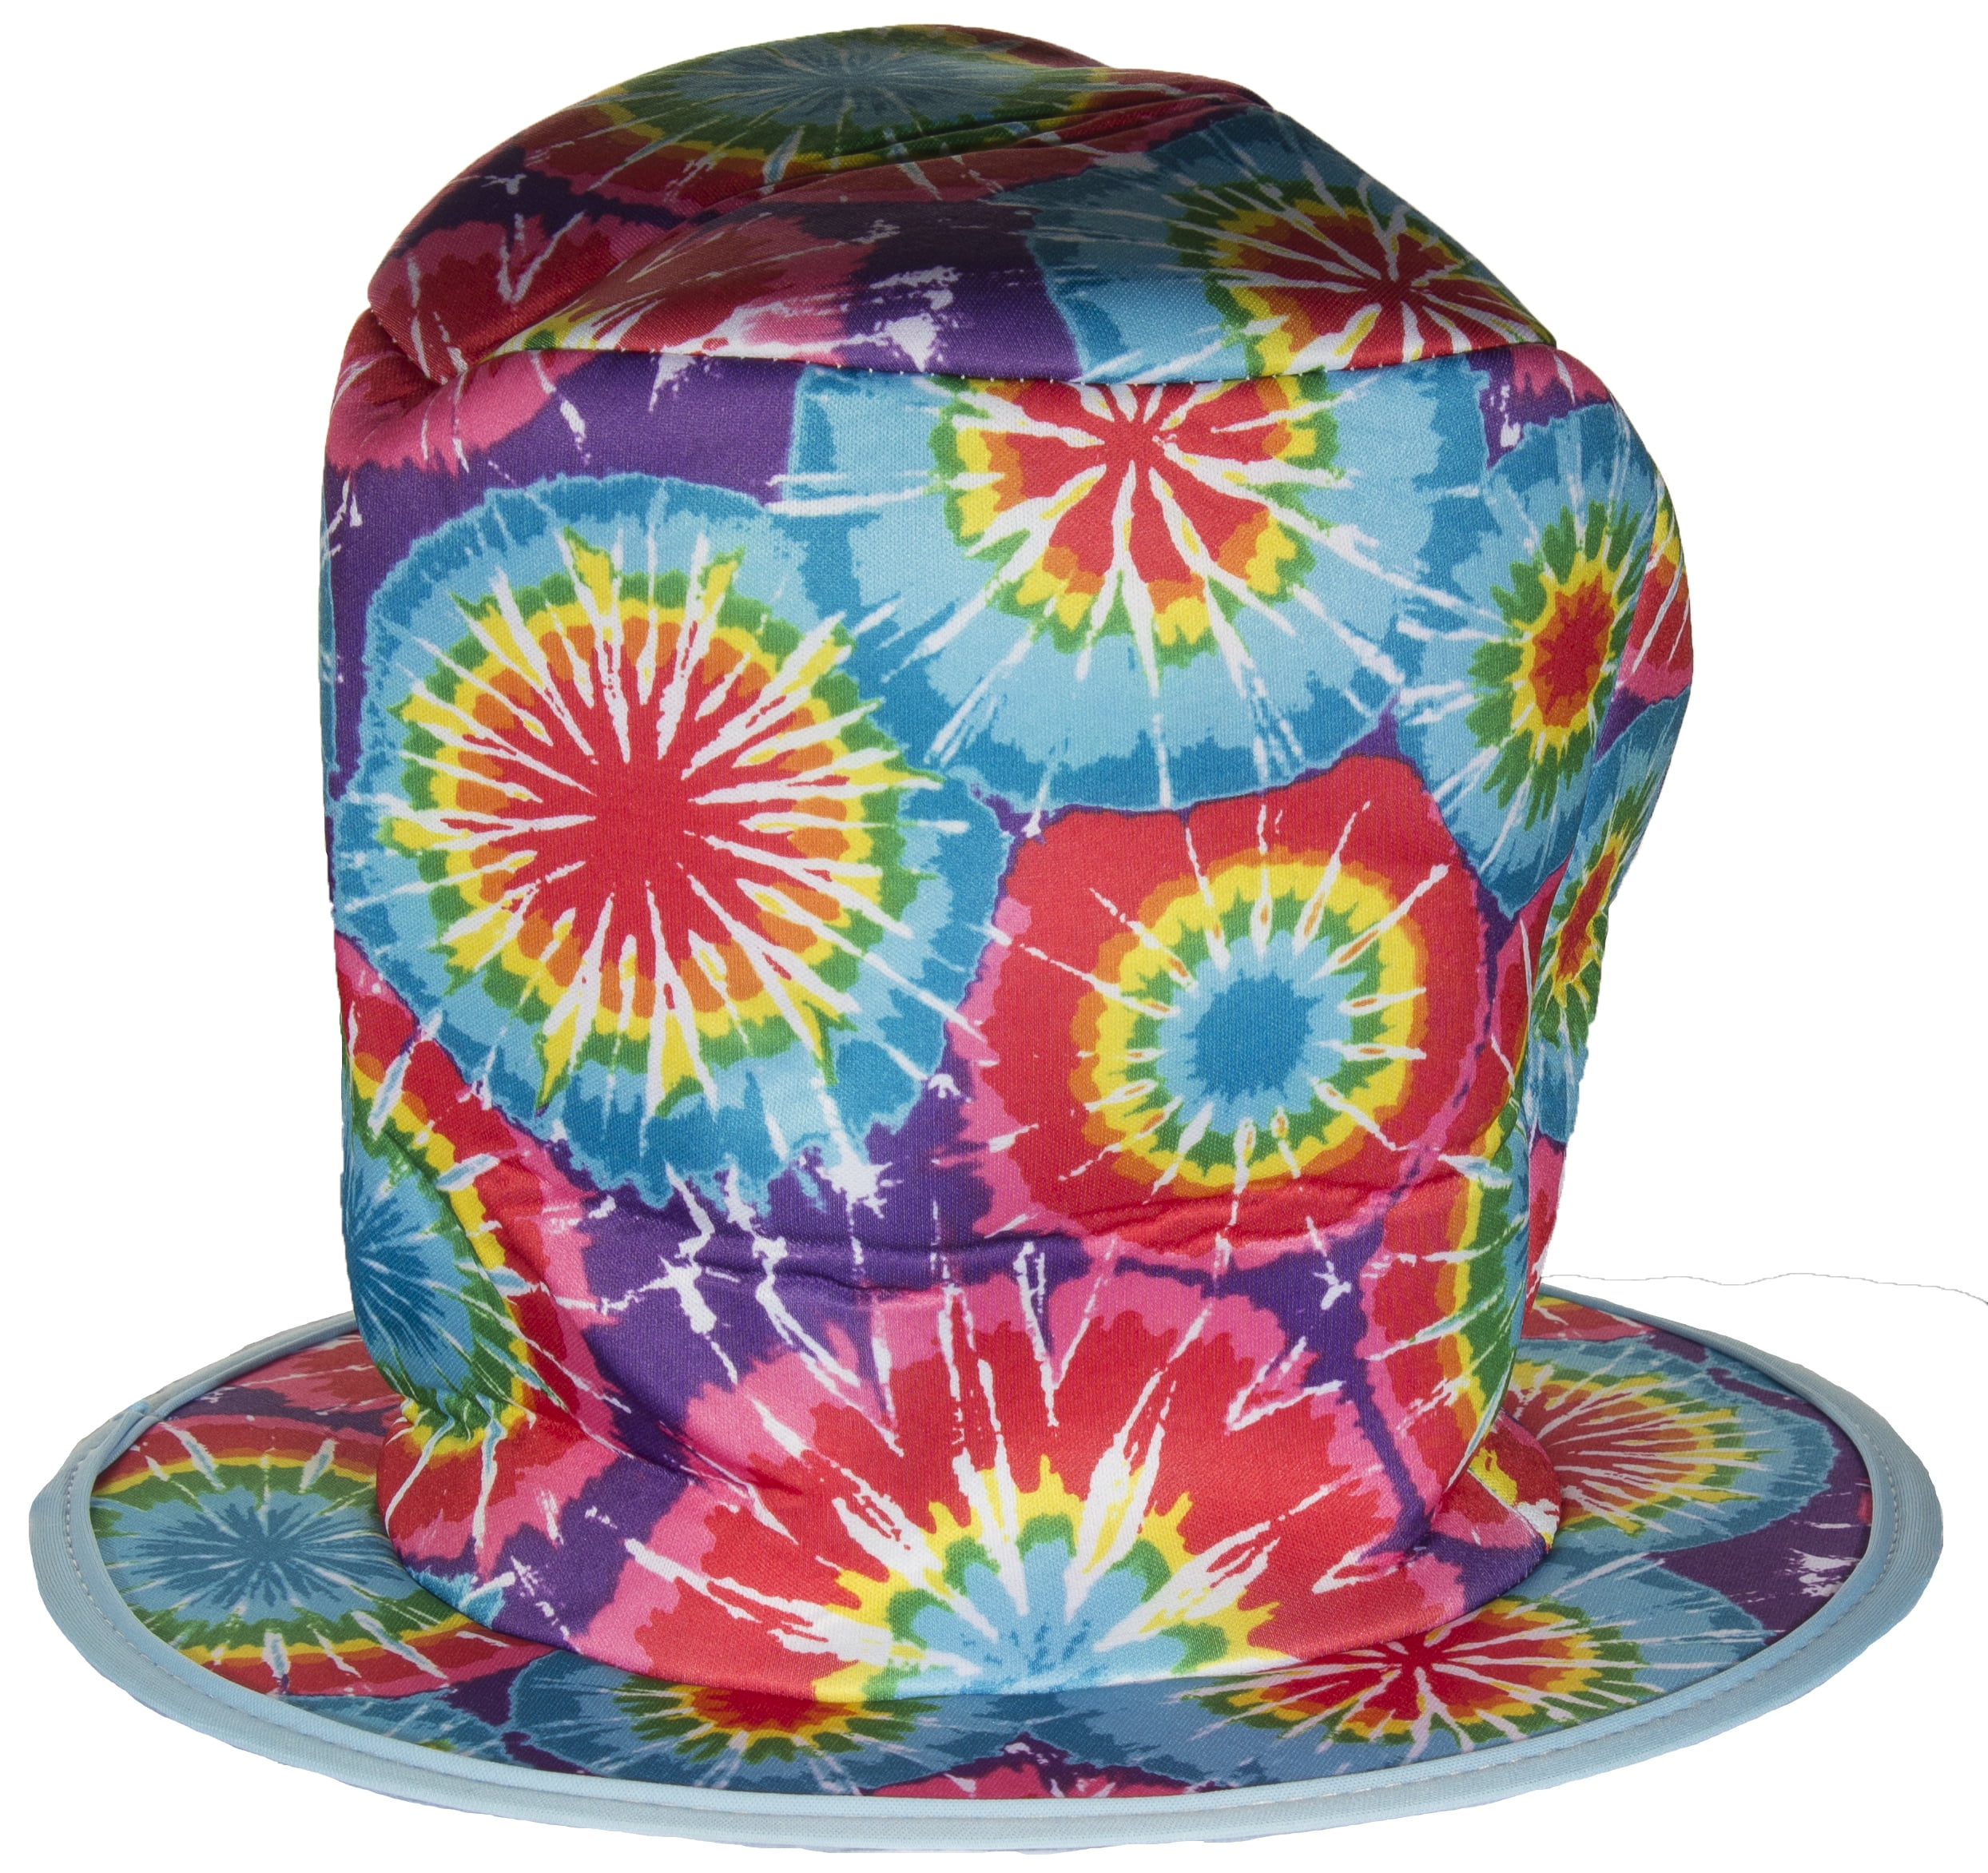 Costume Accessory Tie-Dye Style Mad Hatter Felt Top Hat 